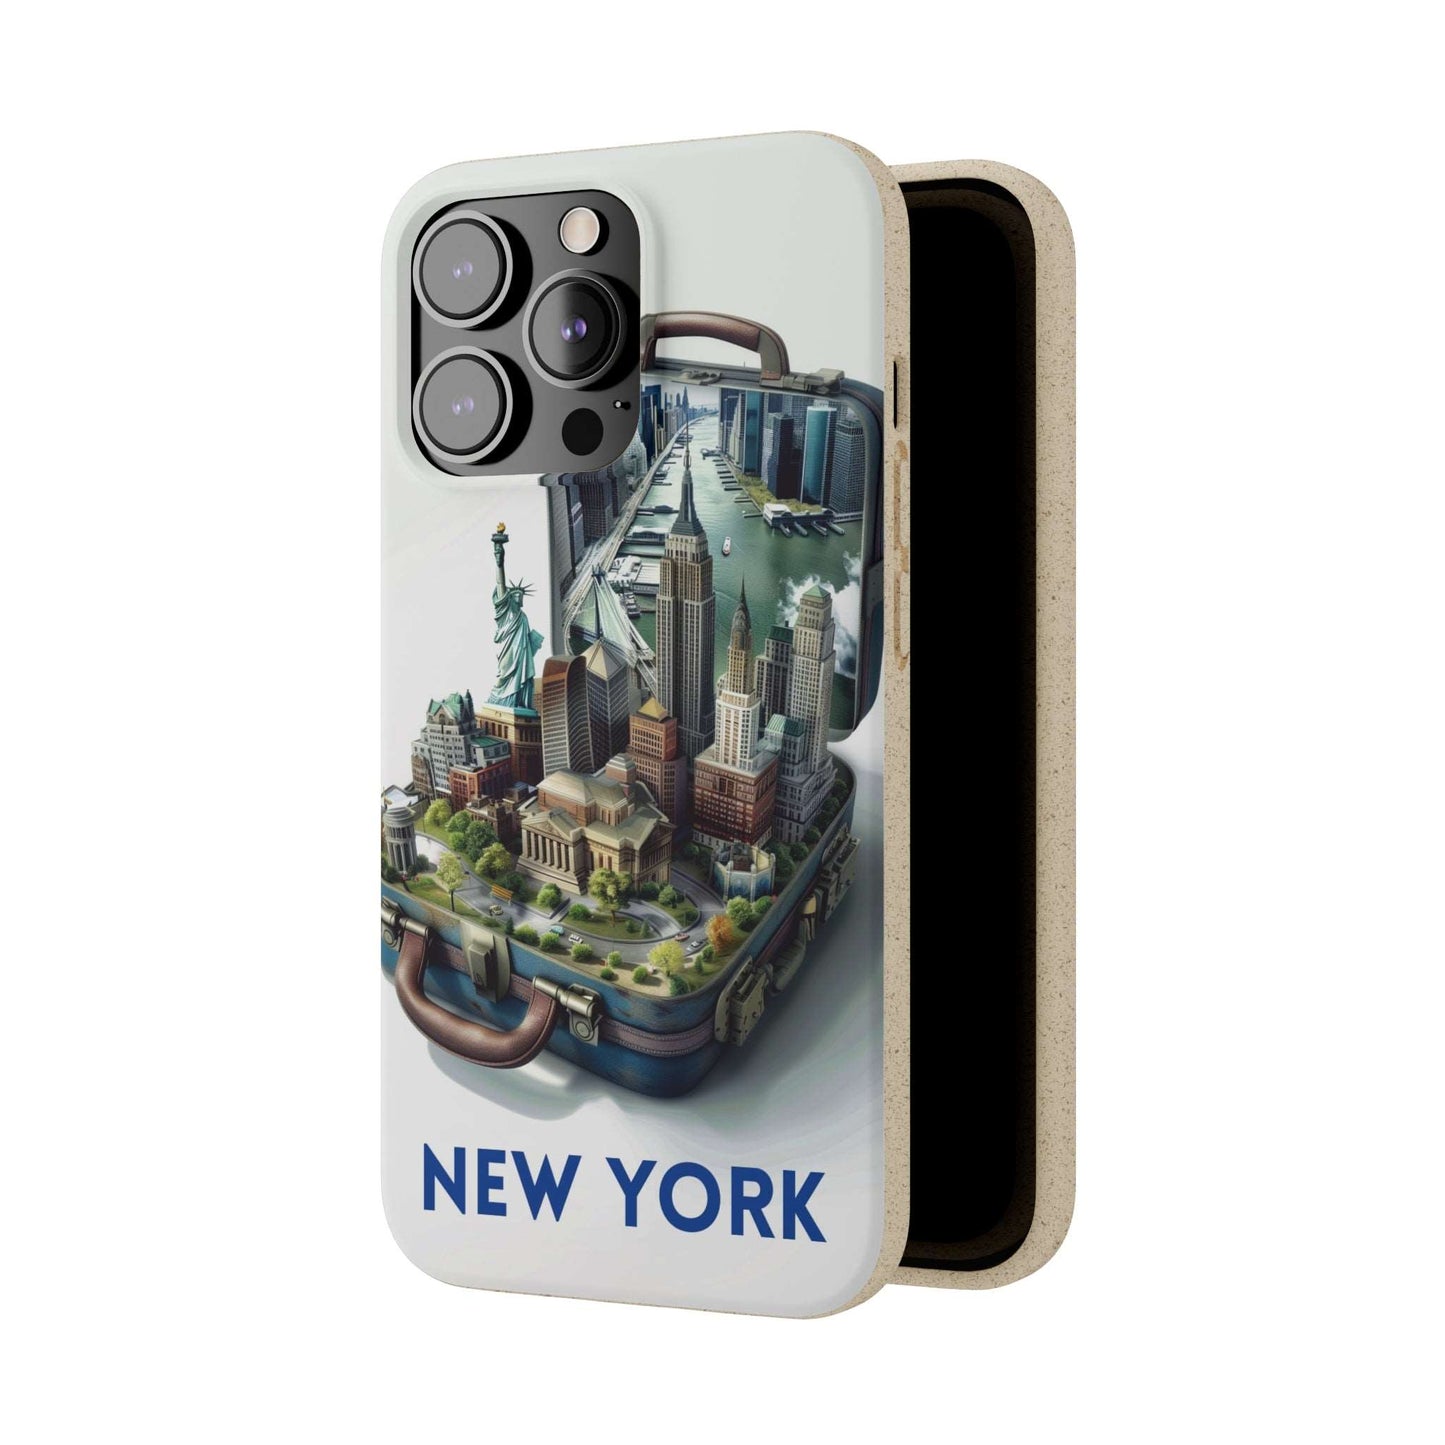 New York phone case made from sustainable plant-based materials and bamboo fibers. Biodegradable and wireless charging compatible